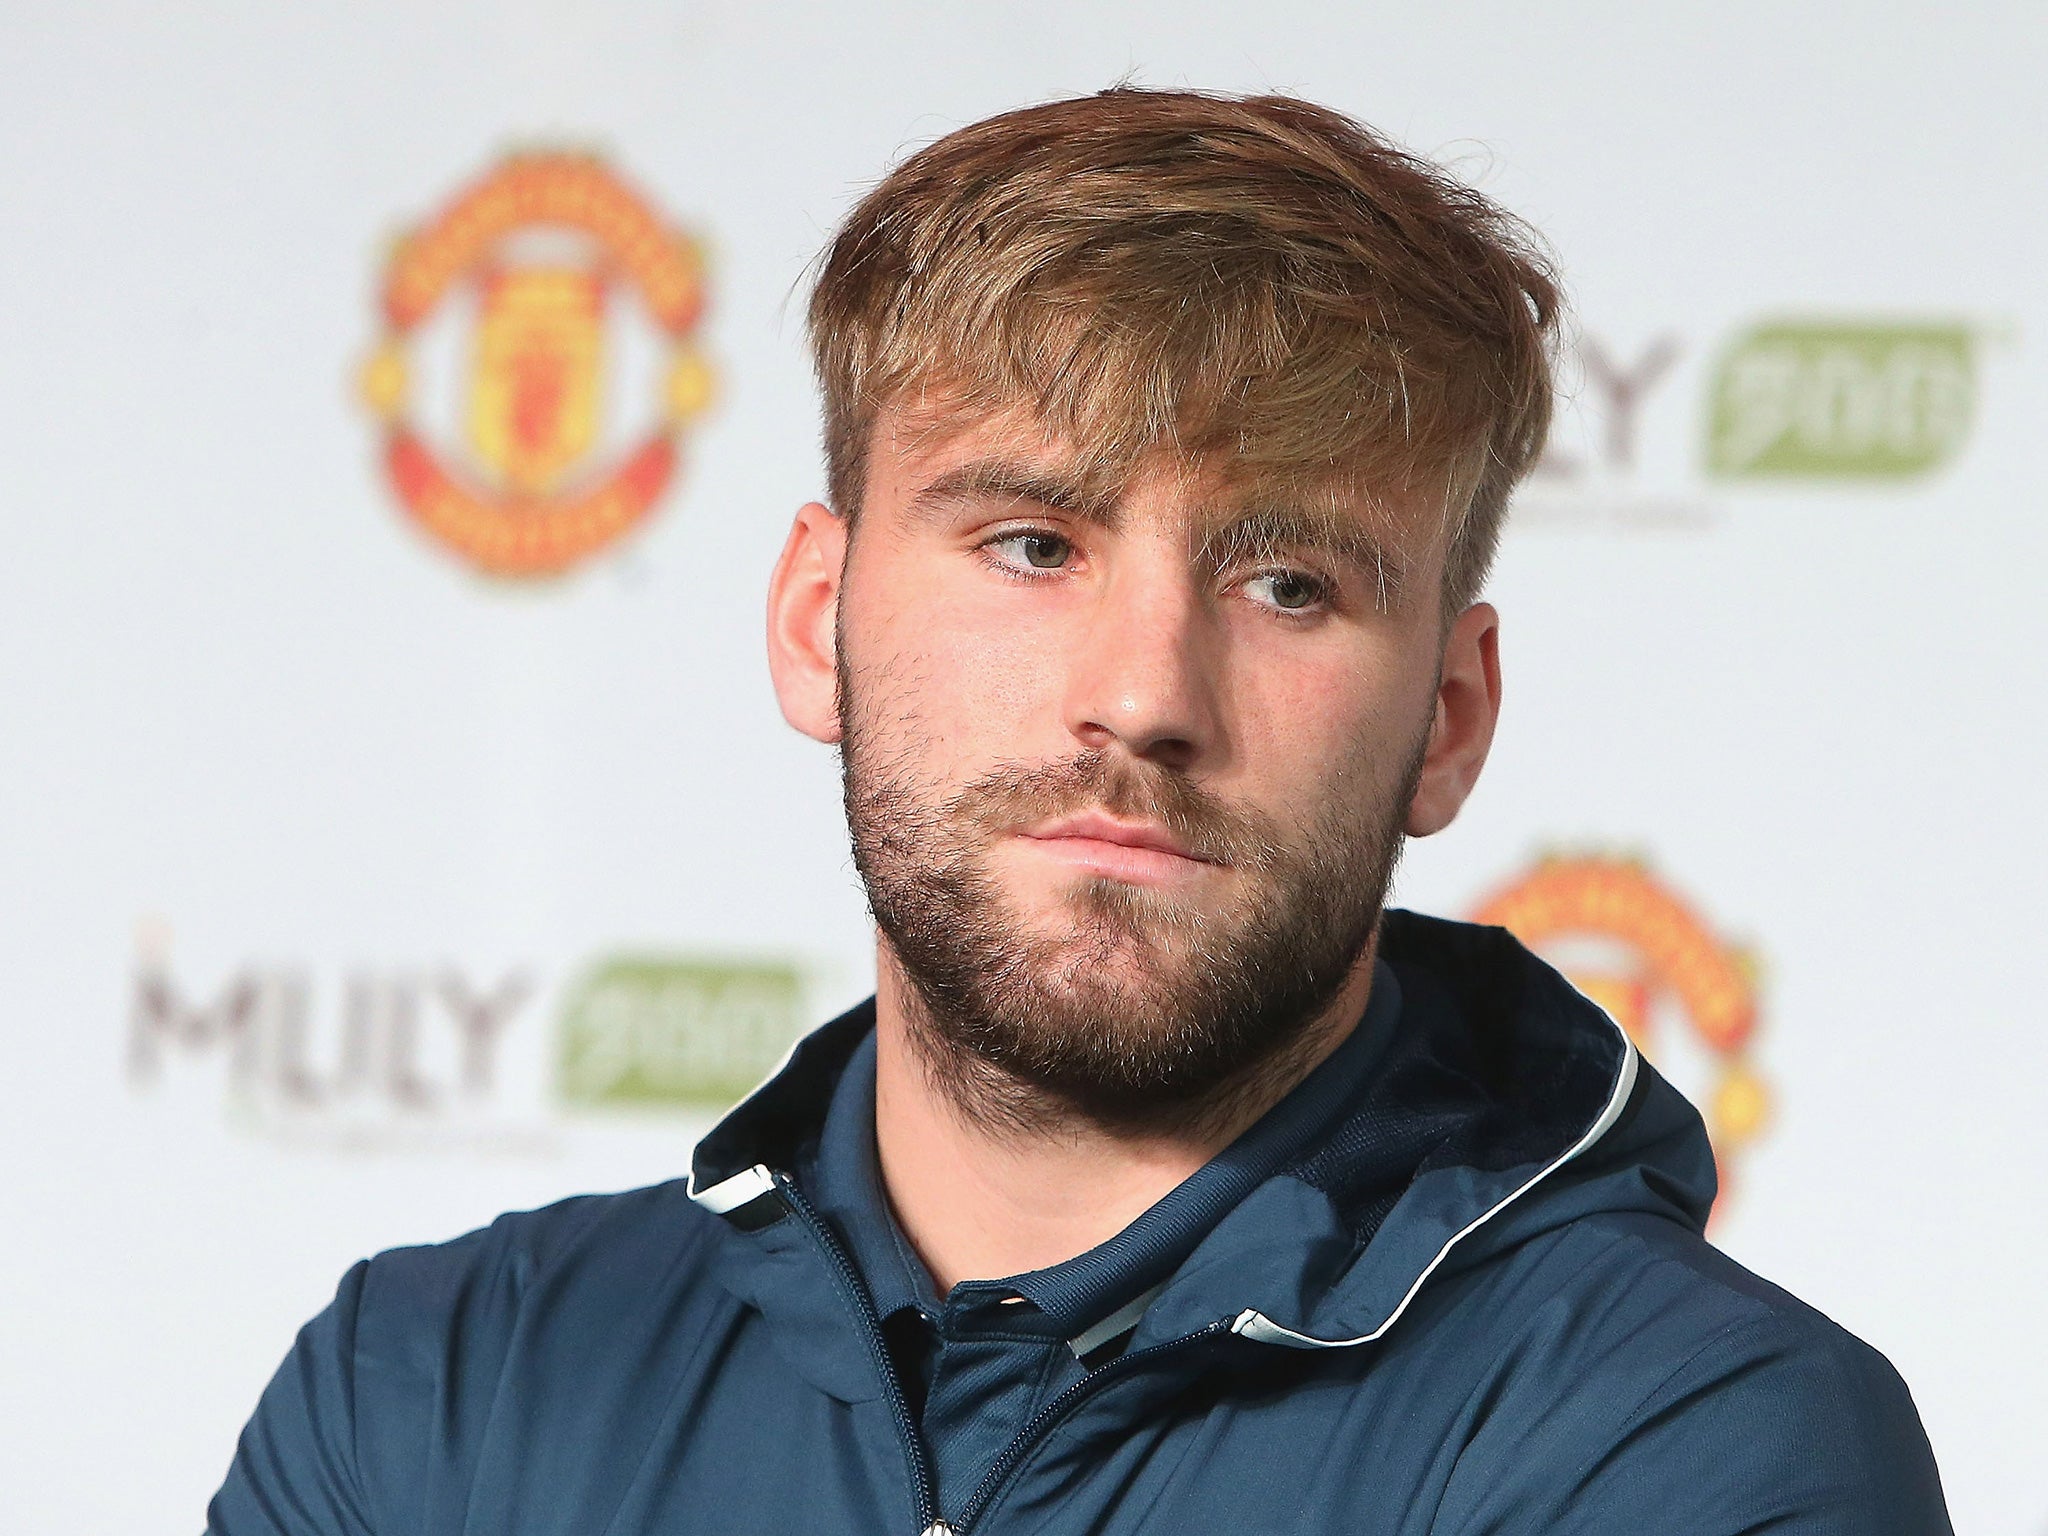 Mourinho previously criticised Shaw after September's defeat to Watford